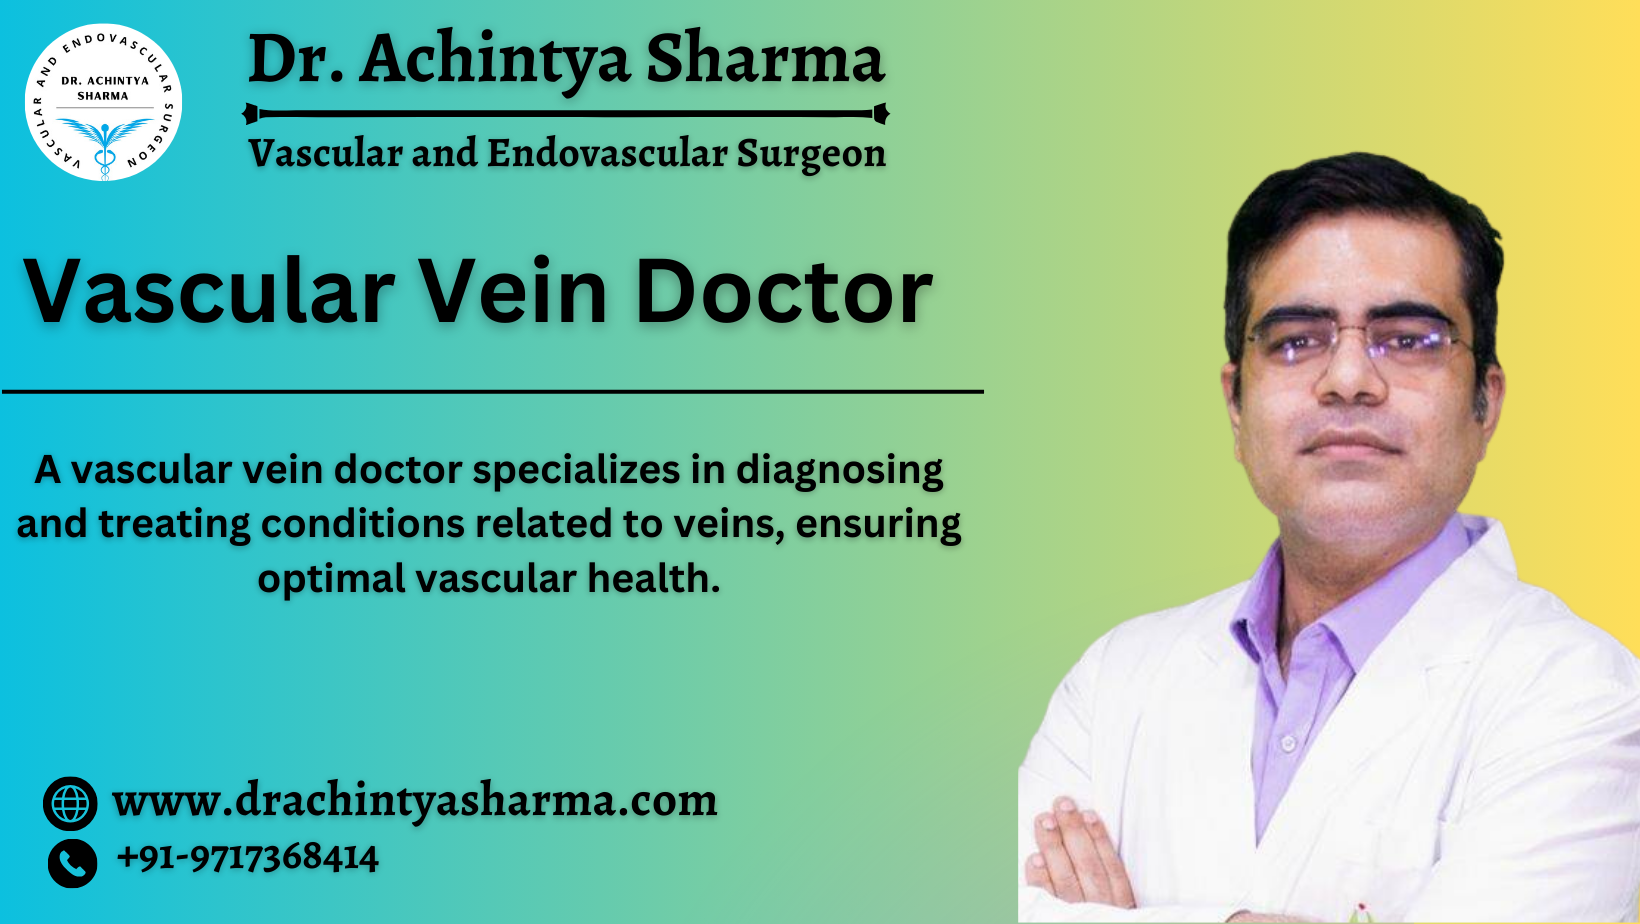 What you should look for in a Vascular Vein Doctor and how to choose the best one